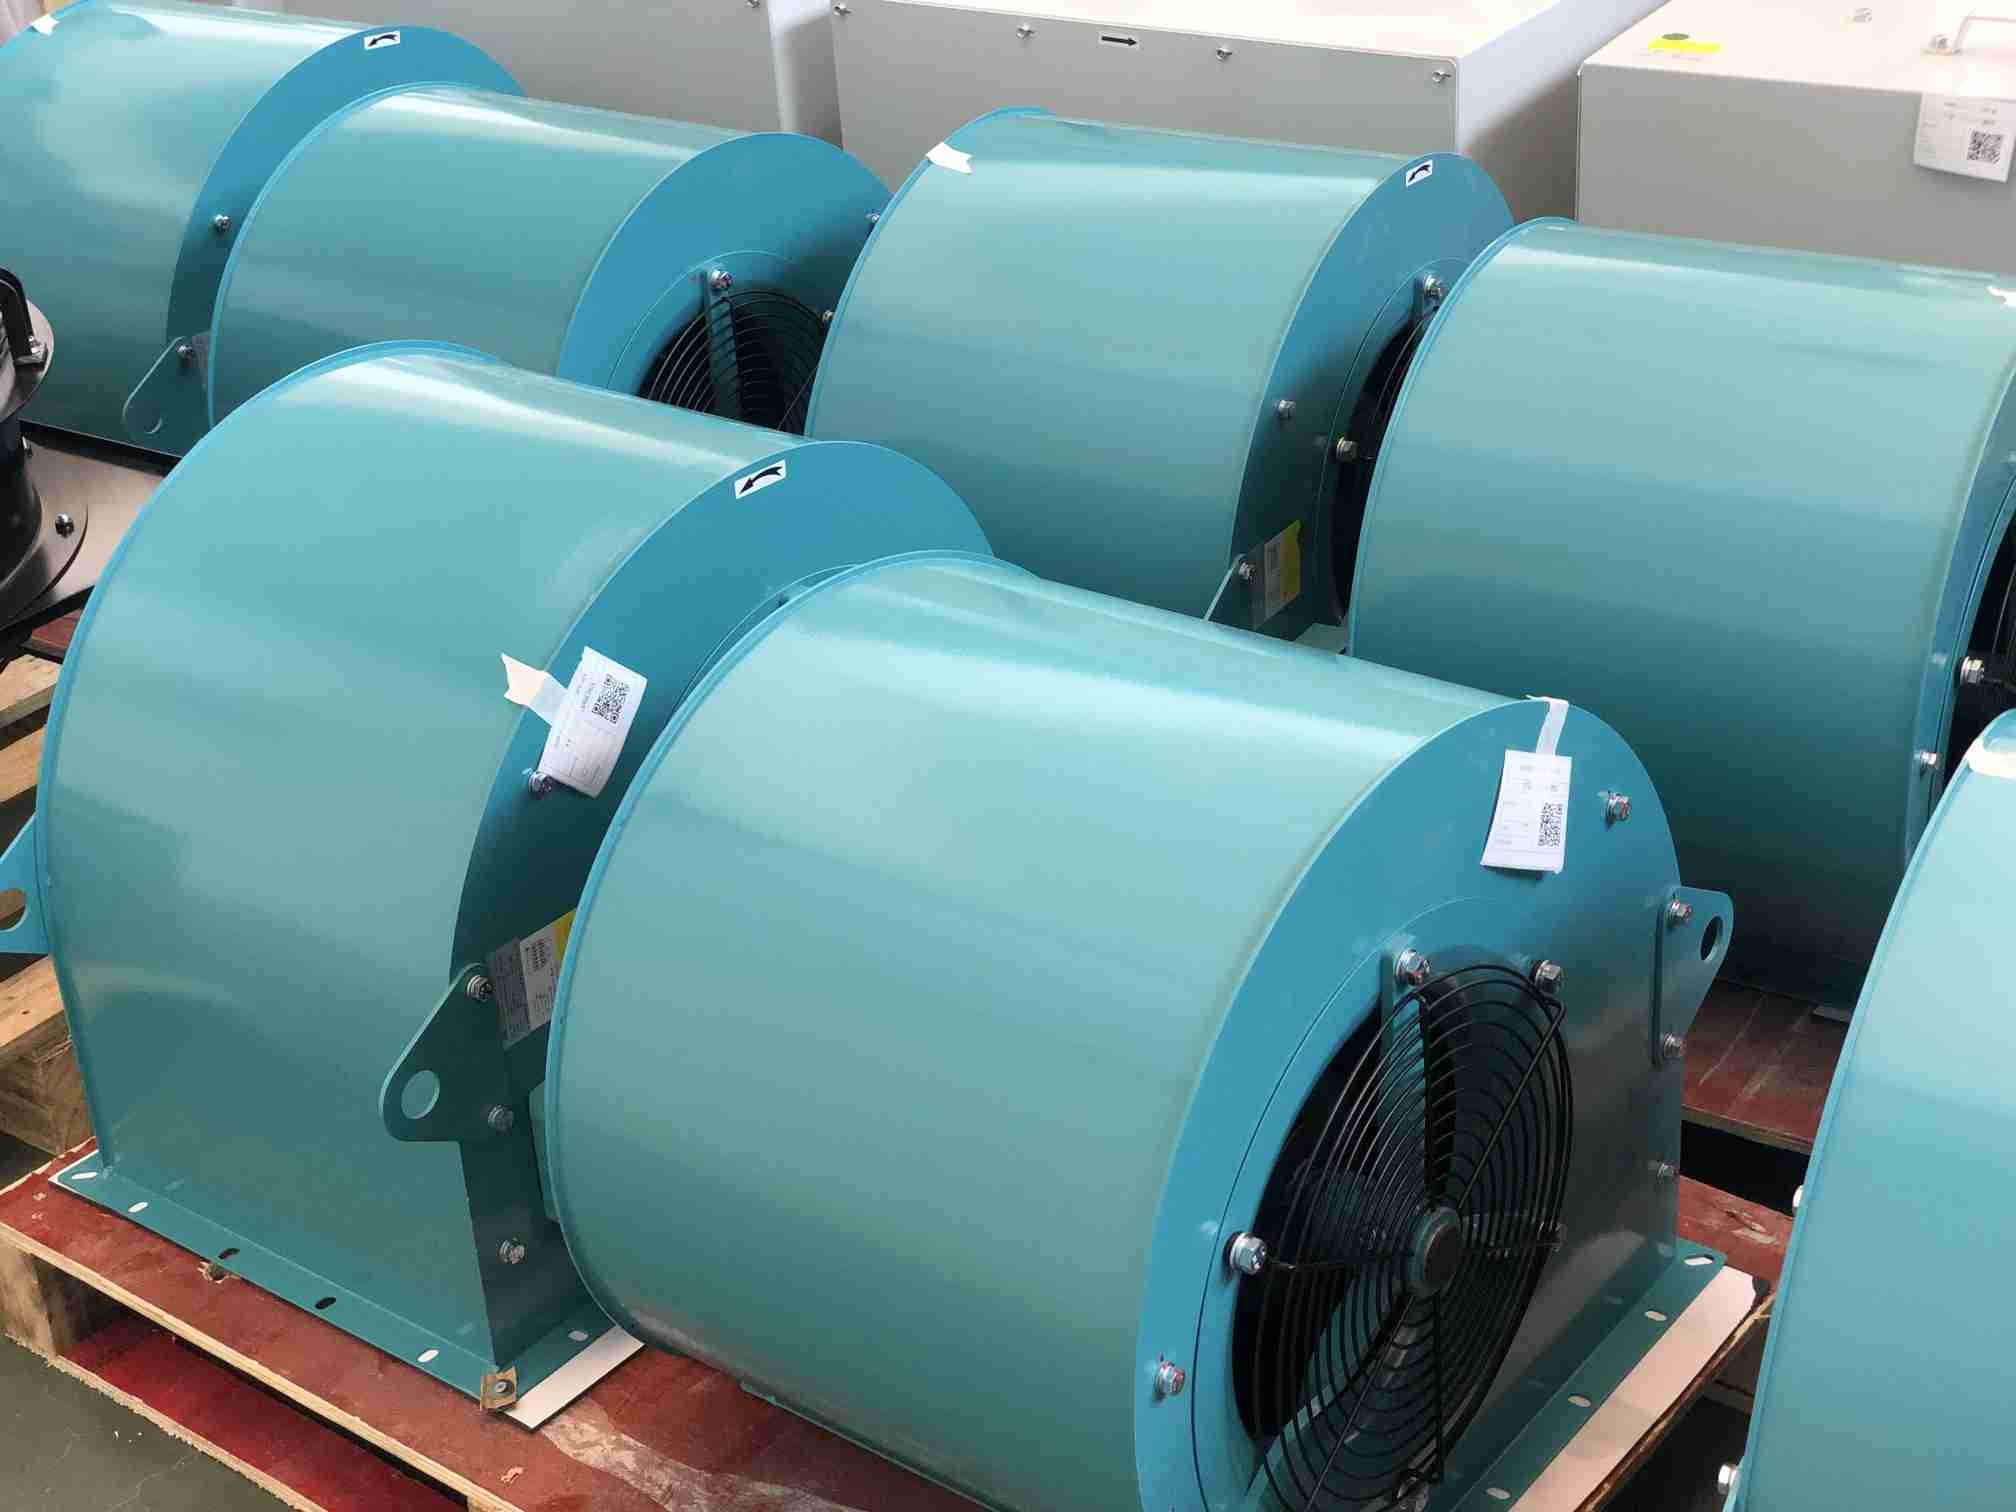 Quality Single Phase 4 Pole Forward Centrifugal Fan With 250mm Blade for sale